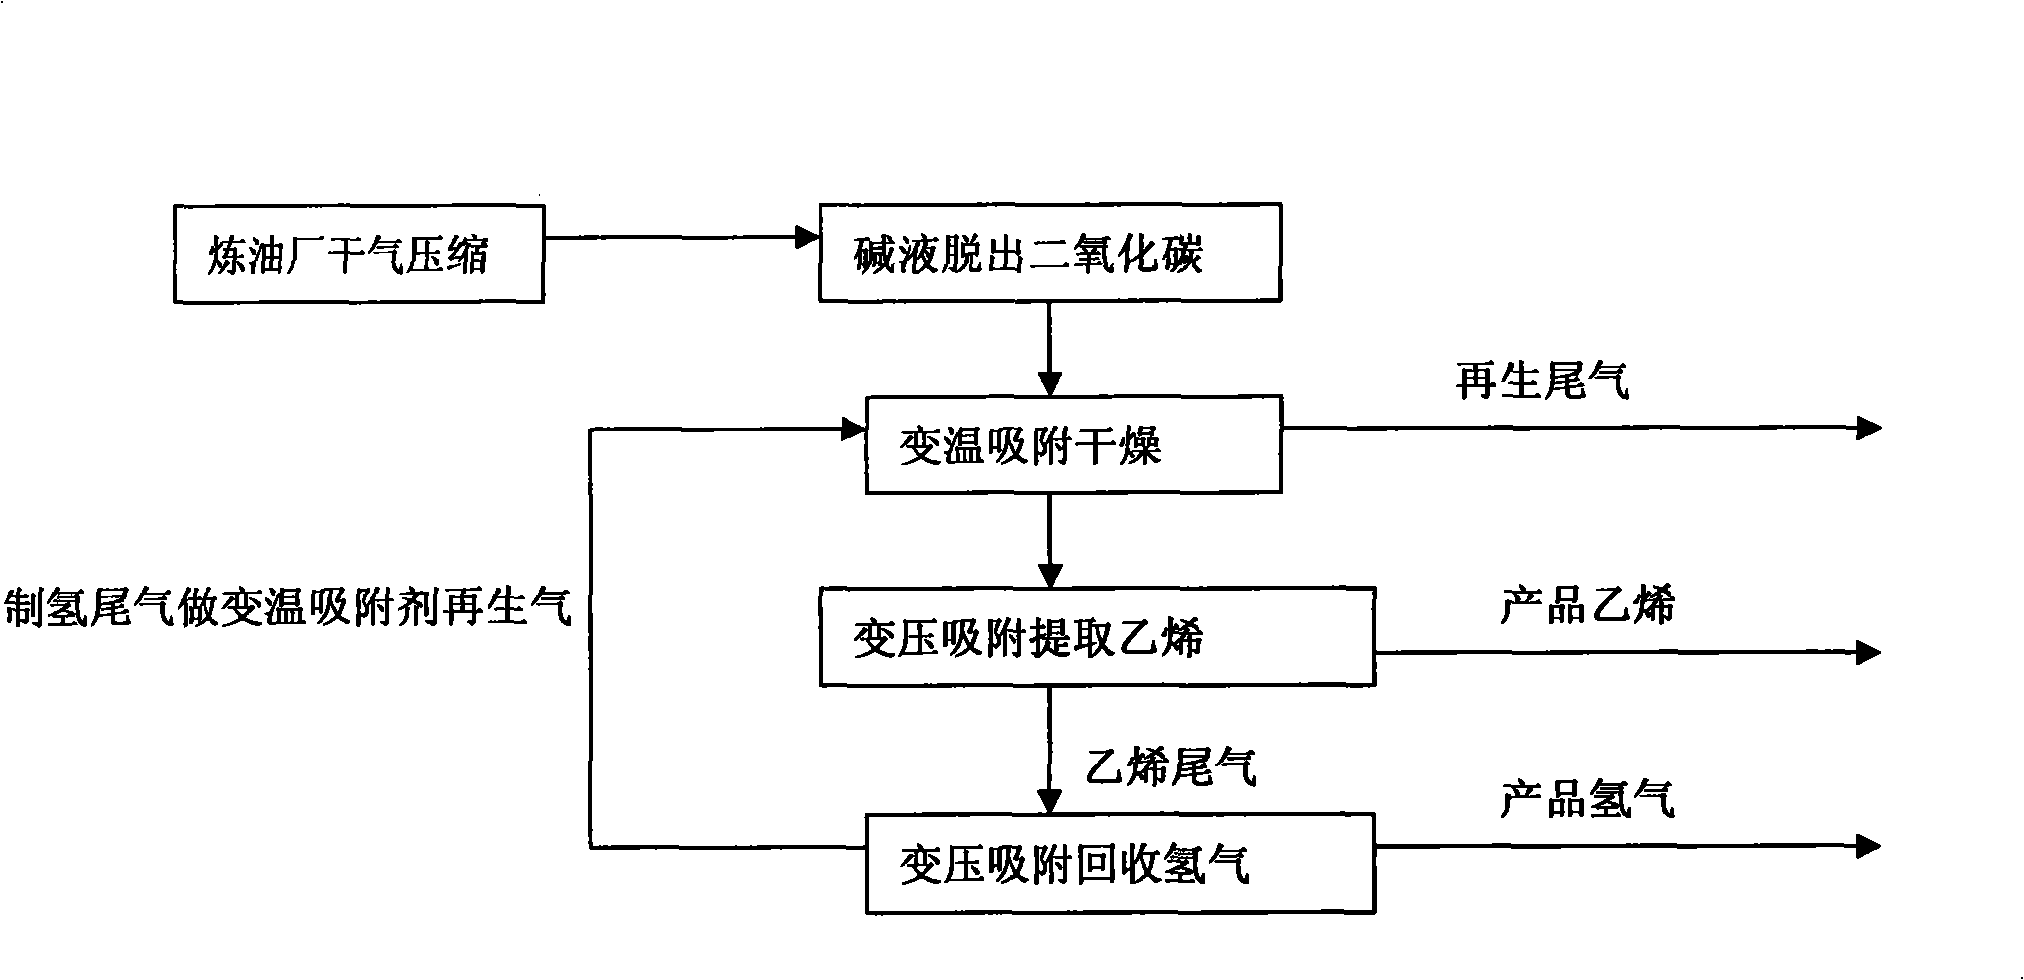 Pressure-change absorption separation method for ethylene and hydrogen from refining plant dry gas